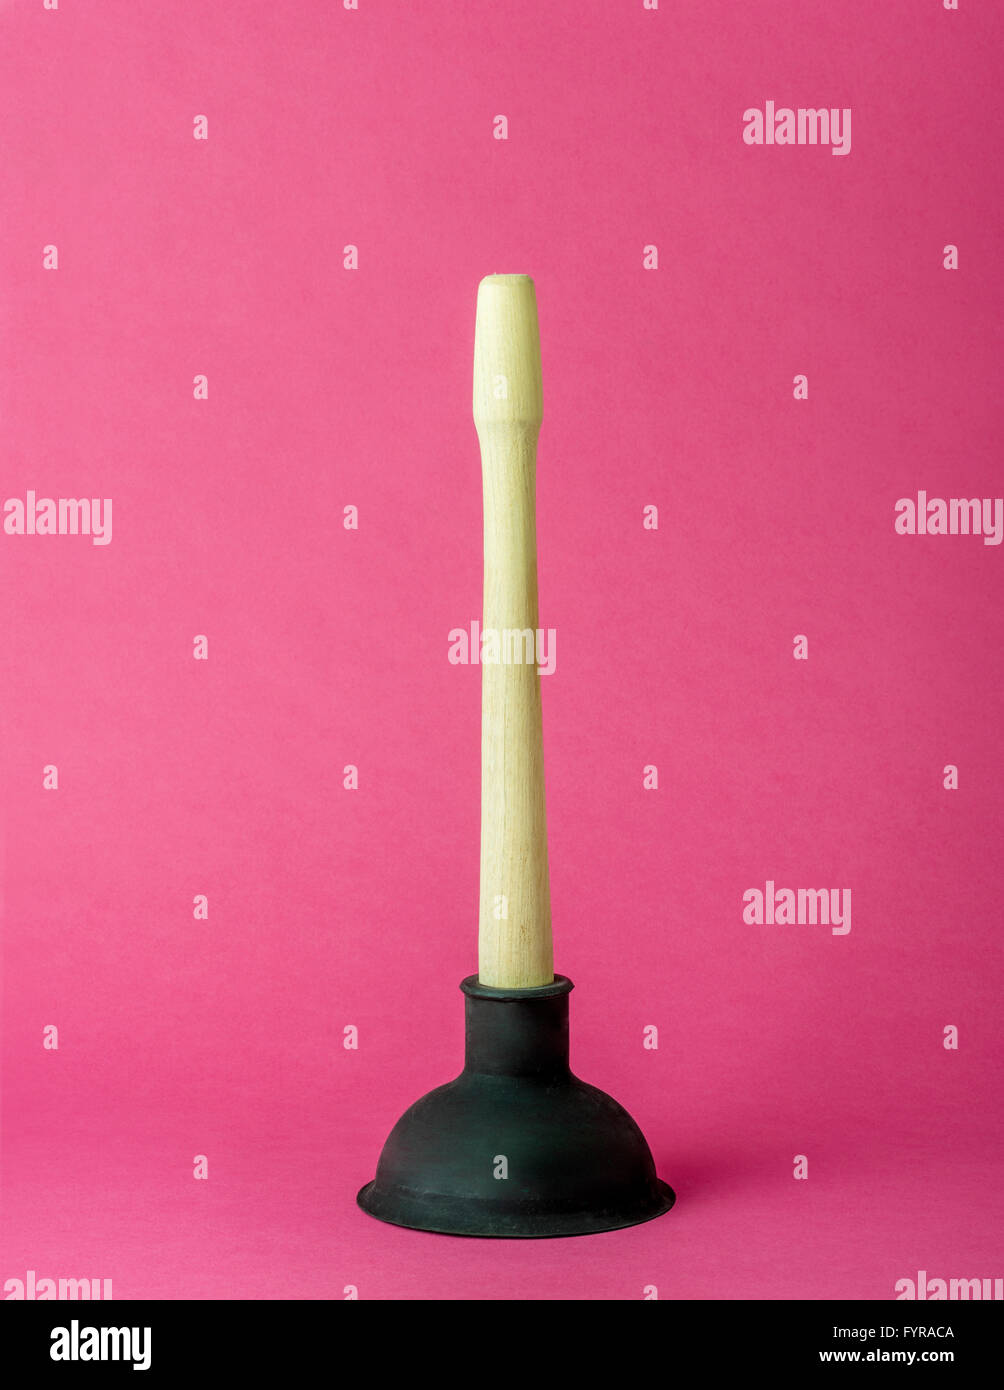 Wooden and rubber sink plunger on pink background Stock Photo